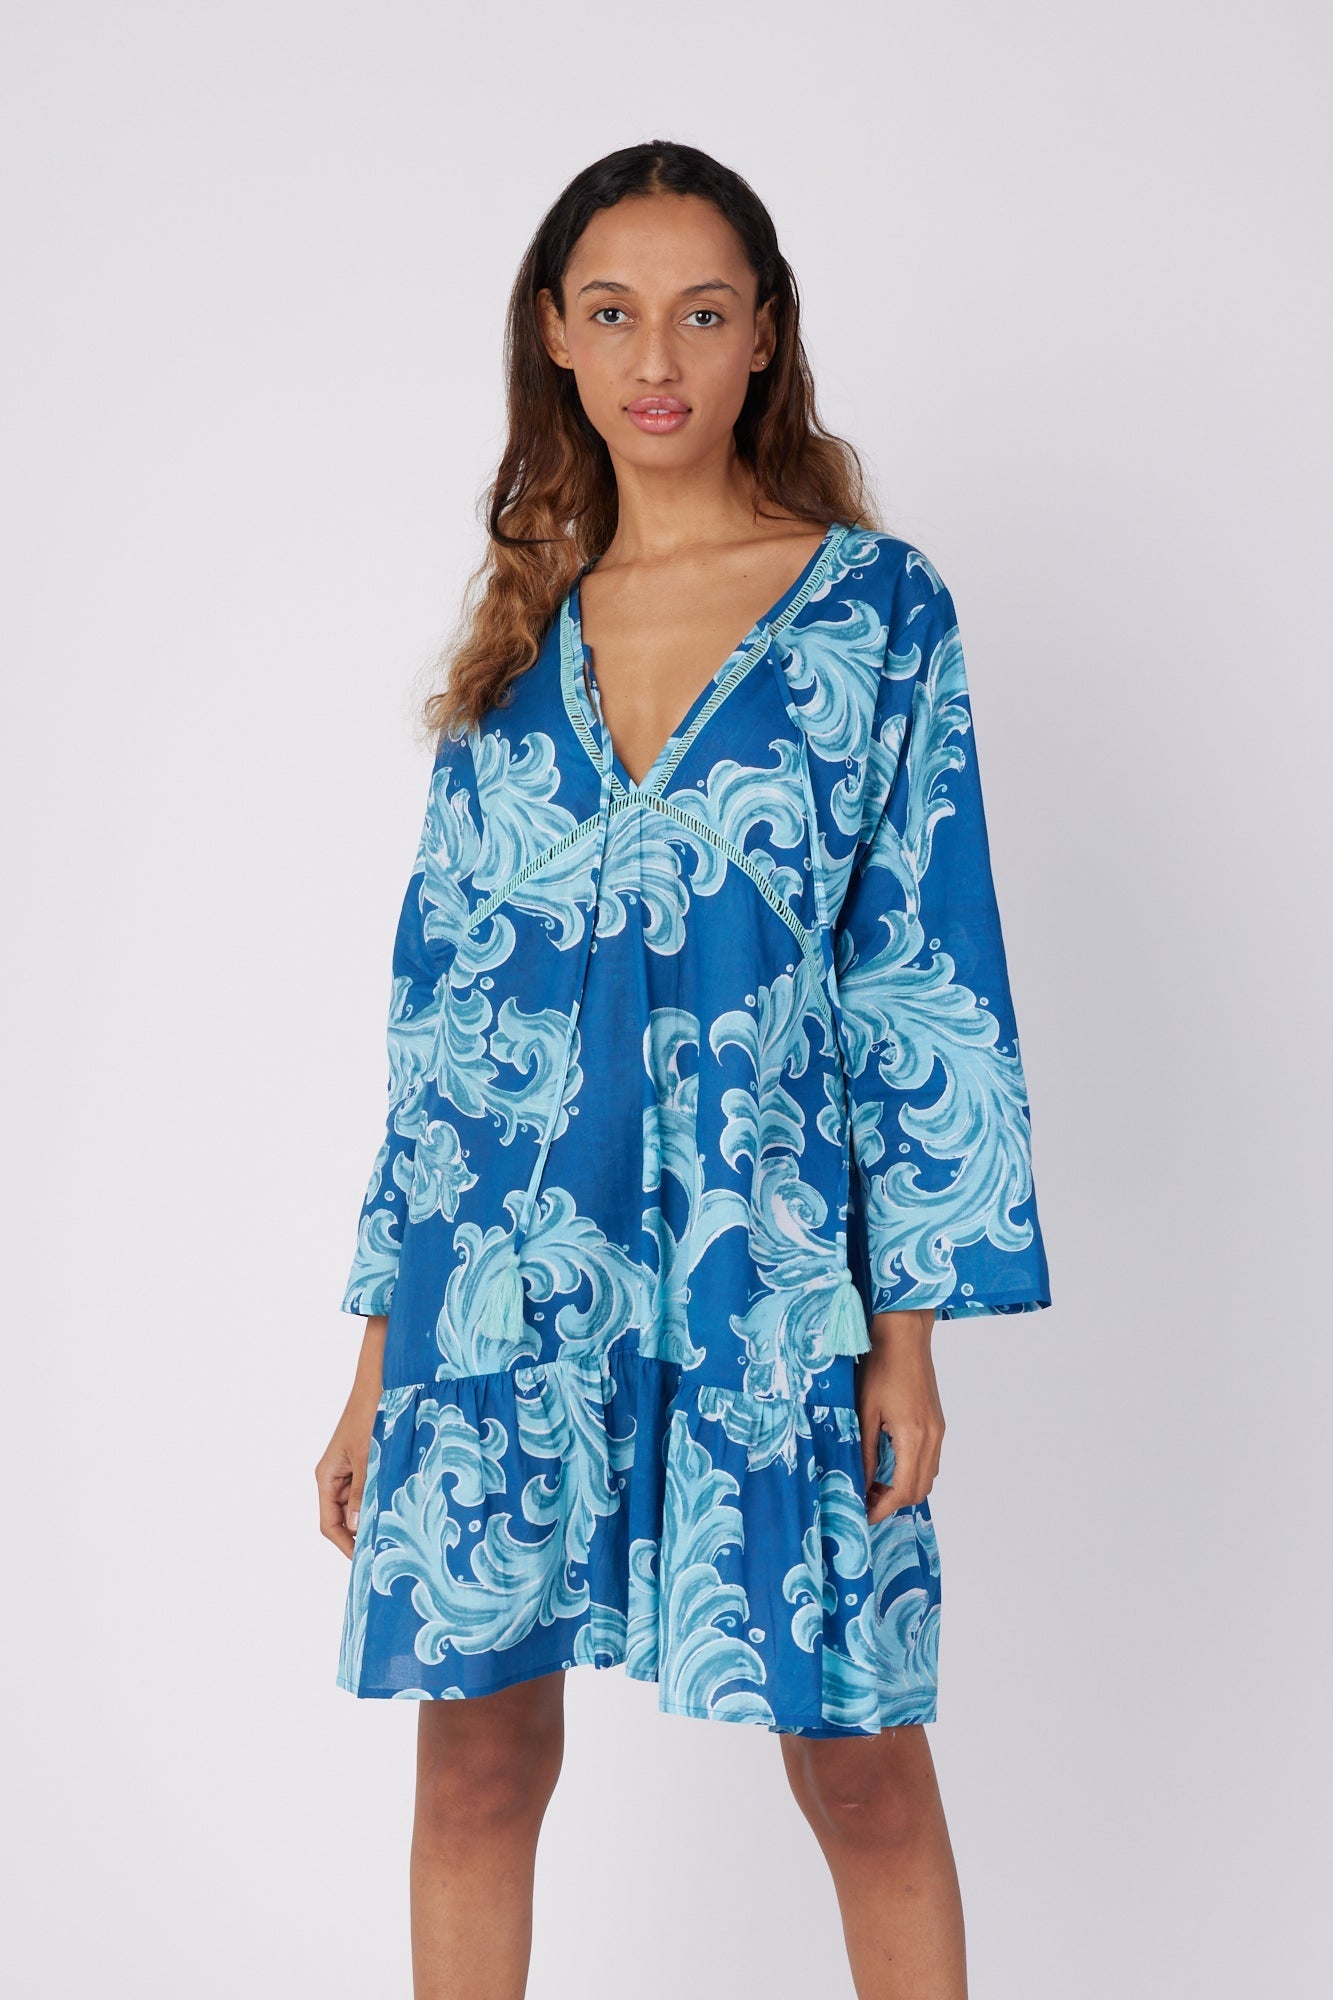 ModaPosa Brigida 3/4 Sleeve Ruffle Knee Length V-Neck Dress in Deep Blue Baroque . Discover women's resort dresses and lifestyle clothing inspired by the Mediterranean. Free worldwide shipping available!